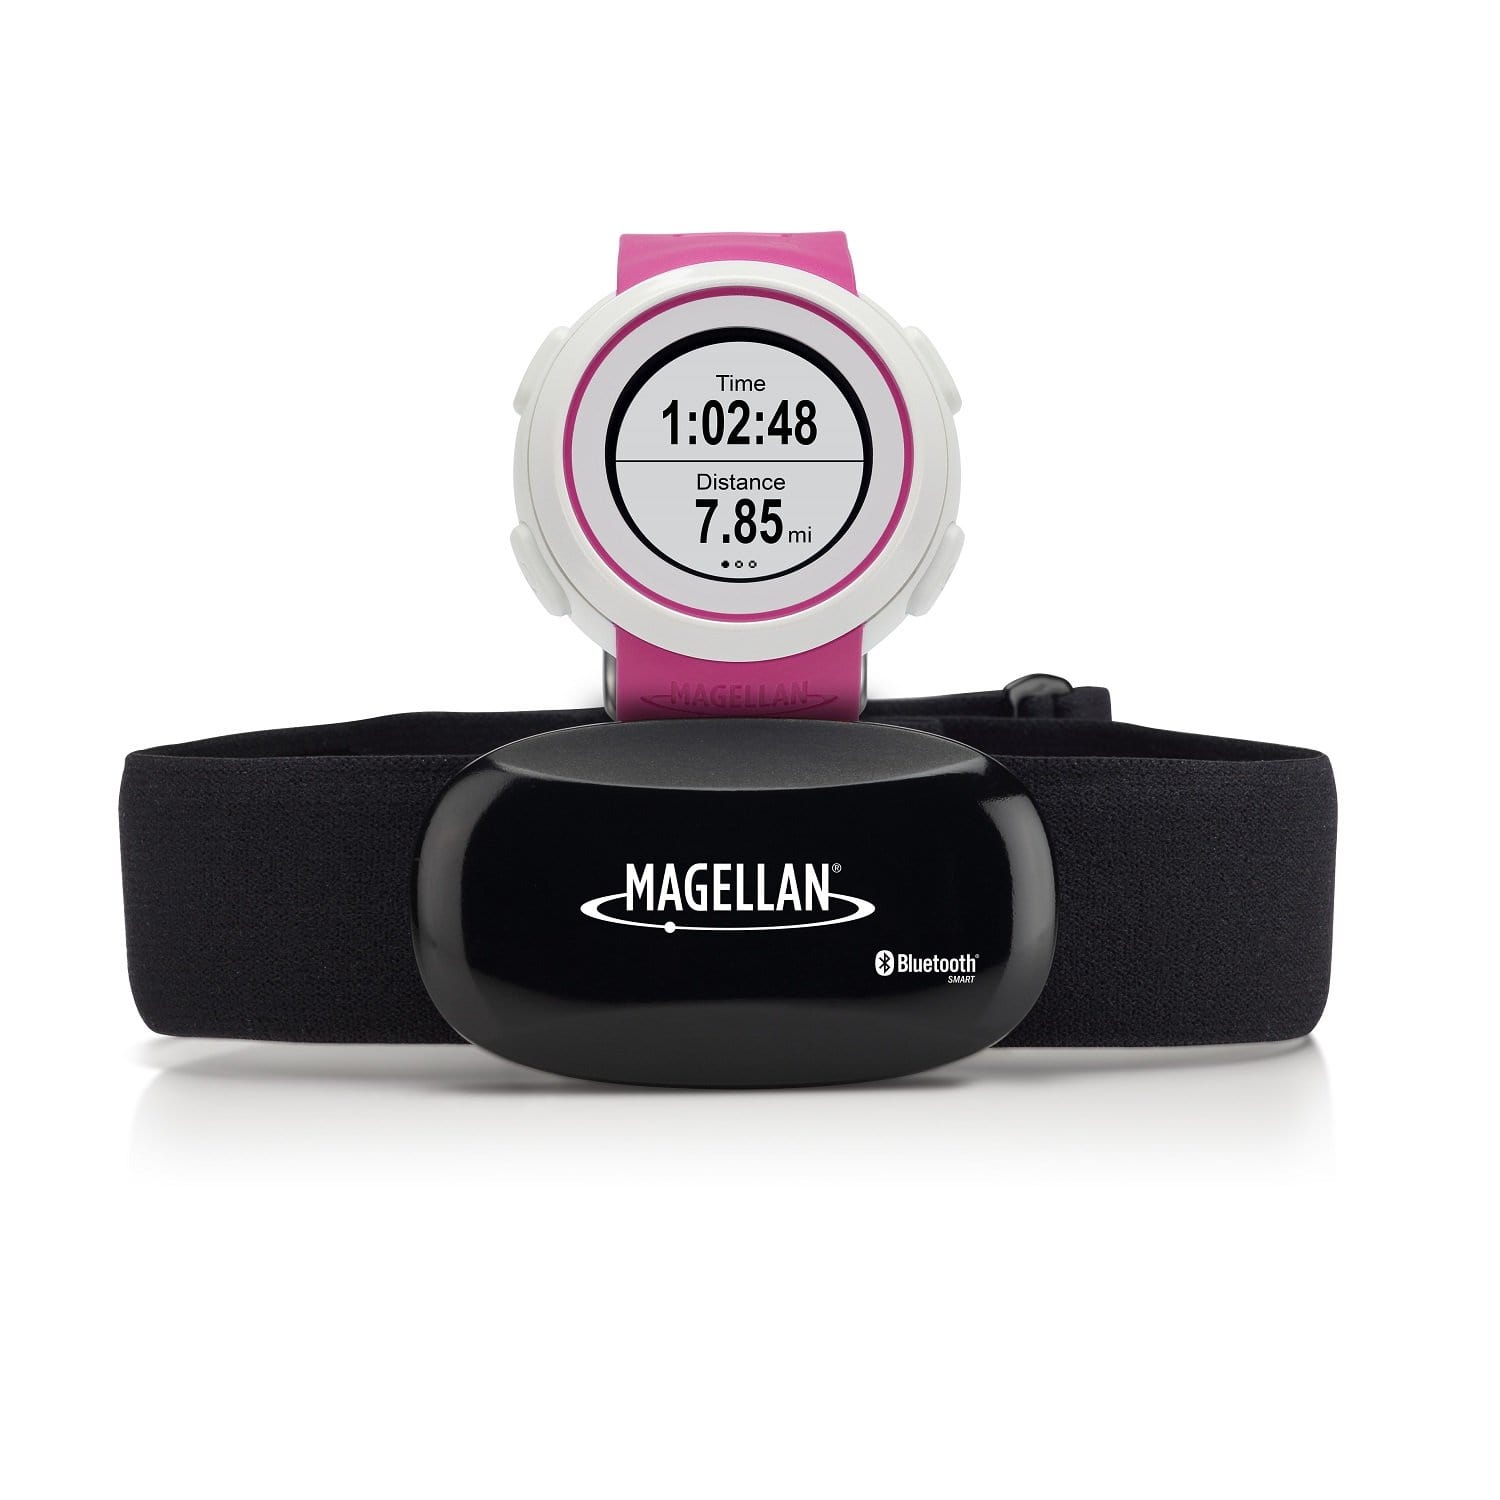 Magellan Sports : Fitness Magellan Echo Fit Sports Watch with Heart Rate Monitor Pink